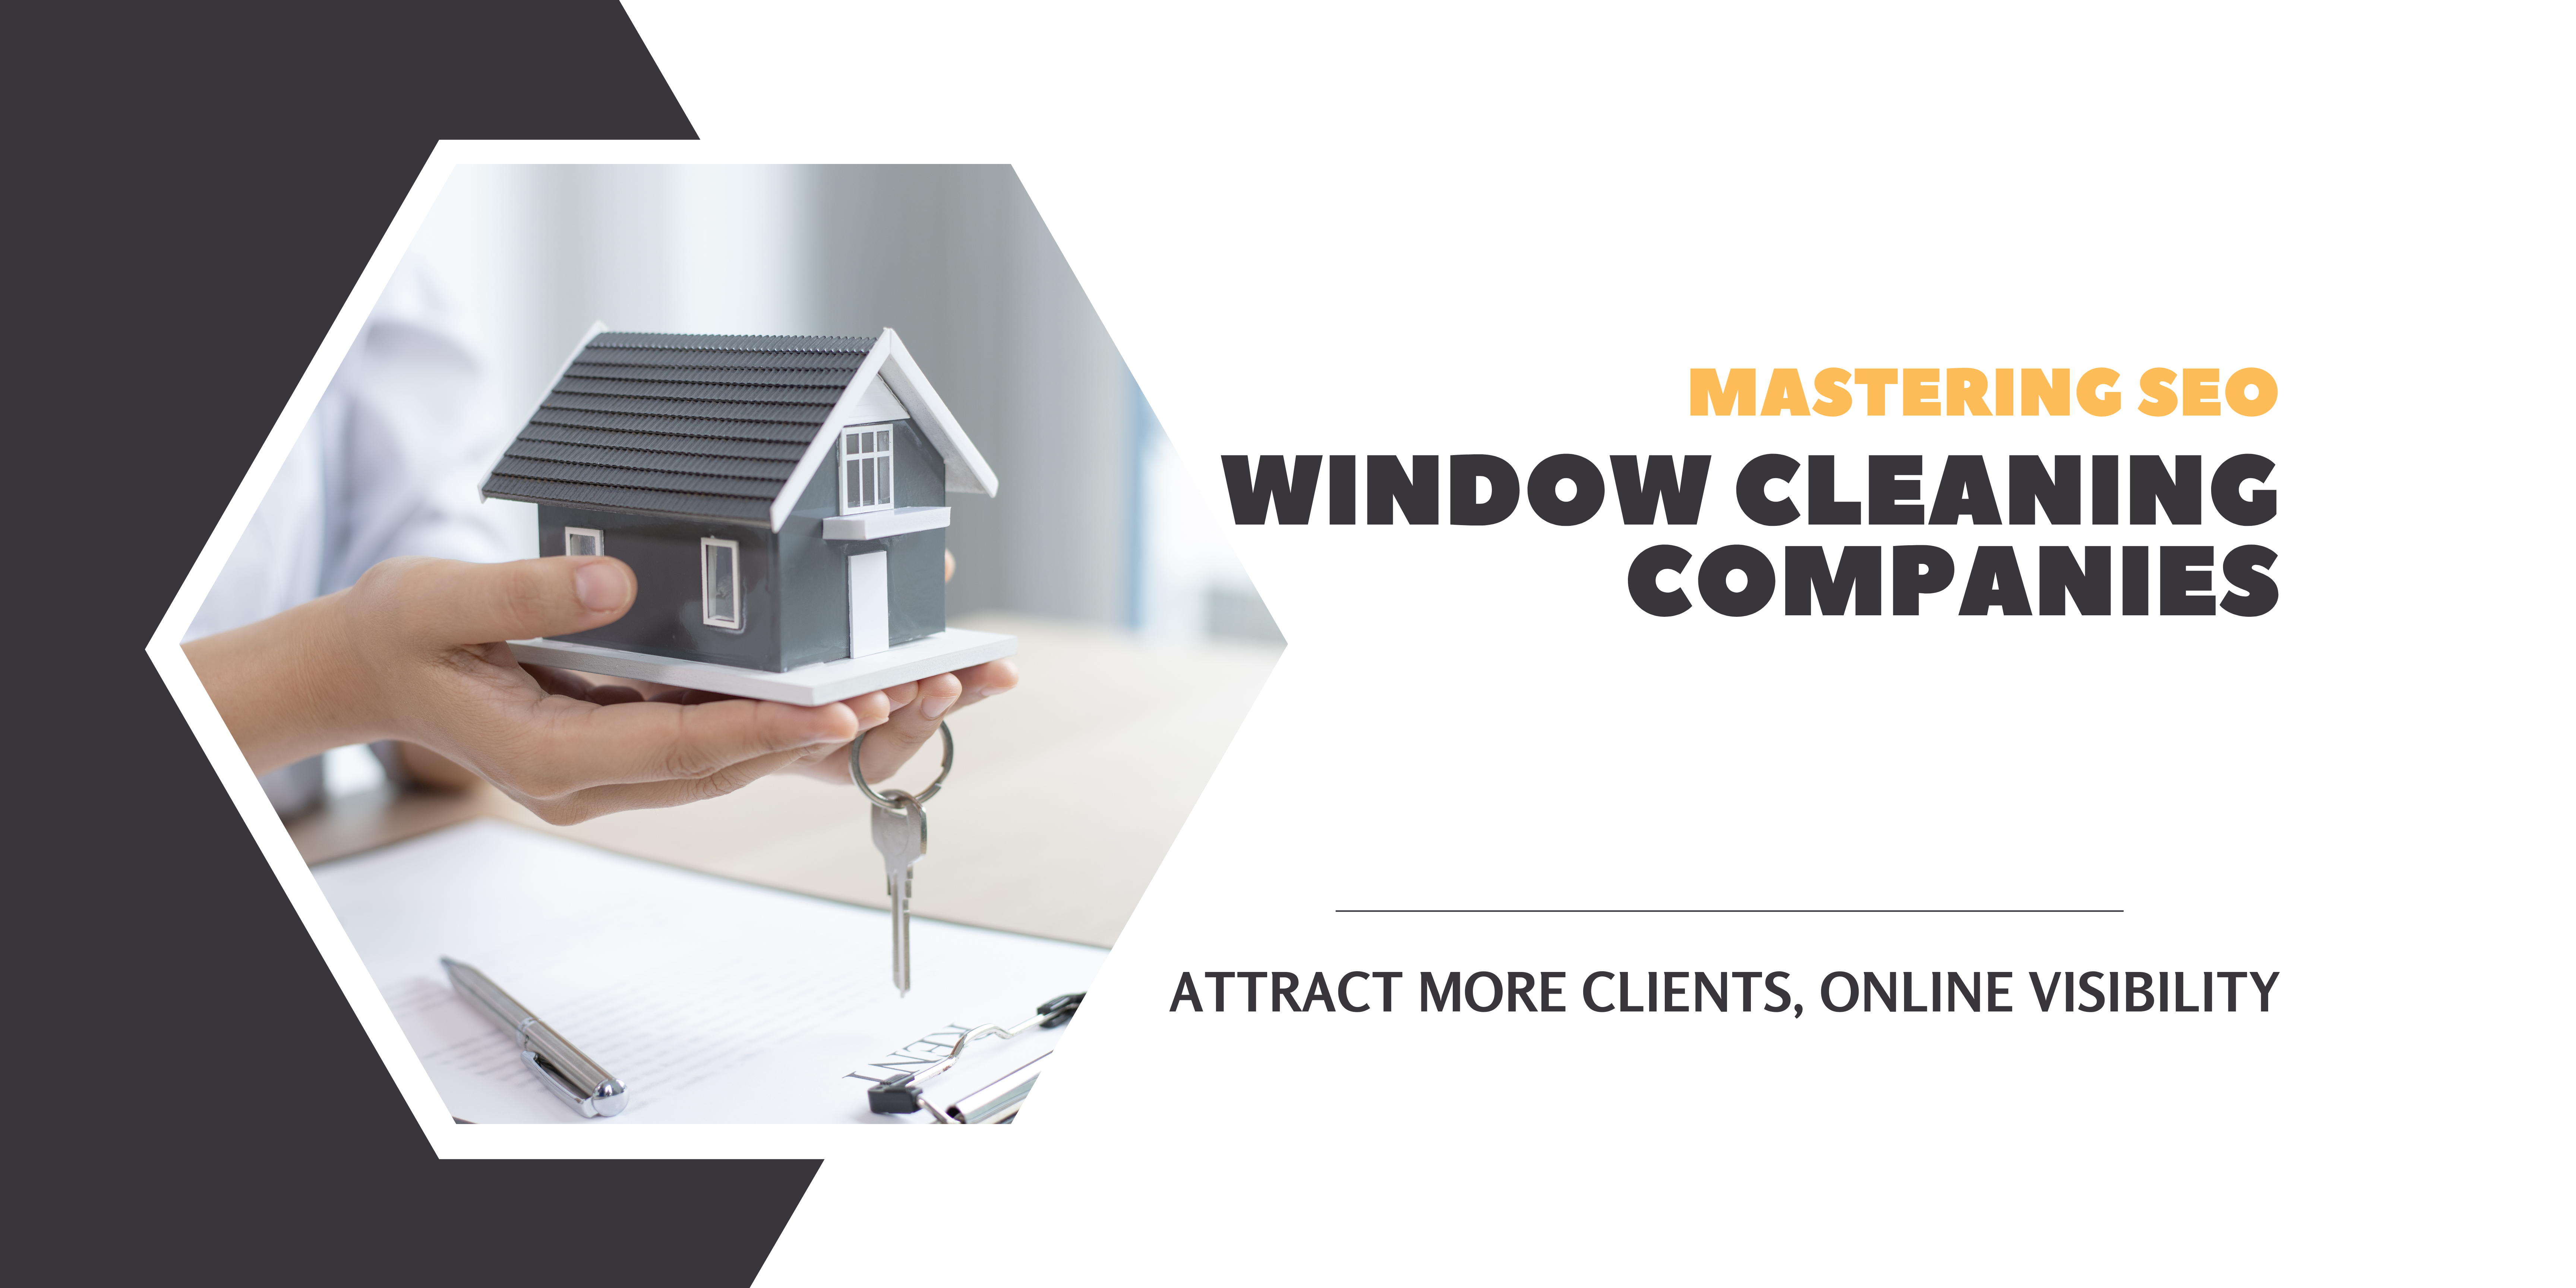 Mastering SEO for Window Cleaning Companies:Attract More Clients, Online Visibility